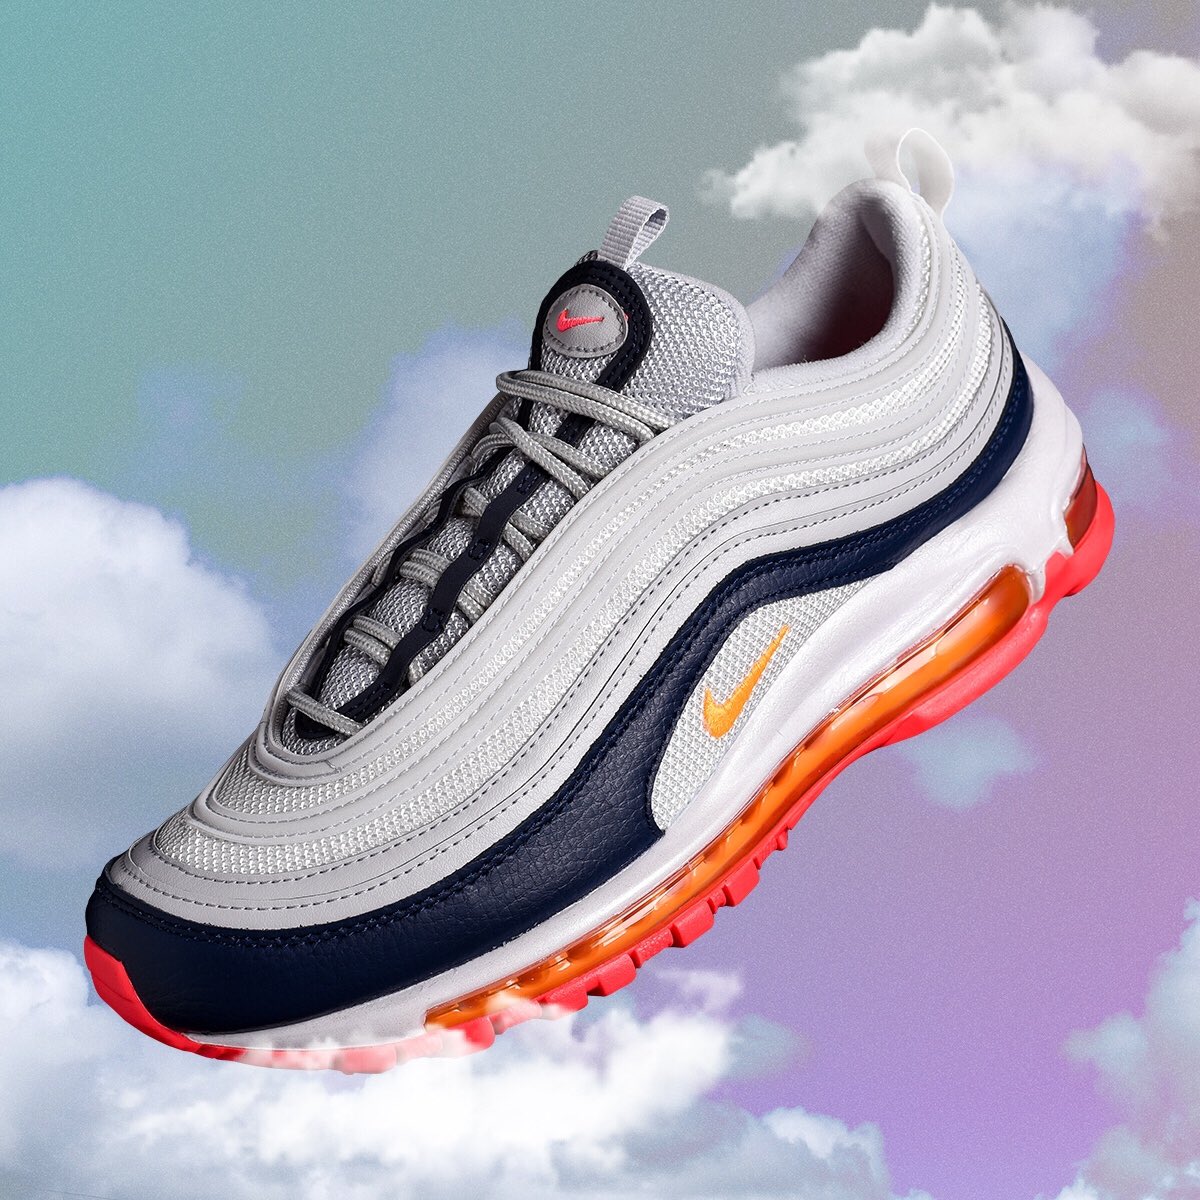 air max 97 inspired by clouds of which city